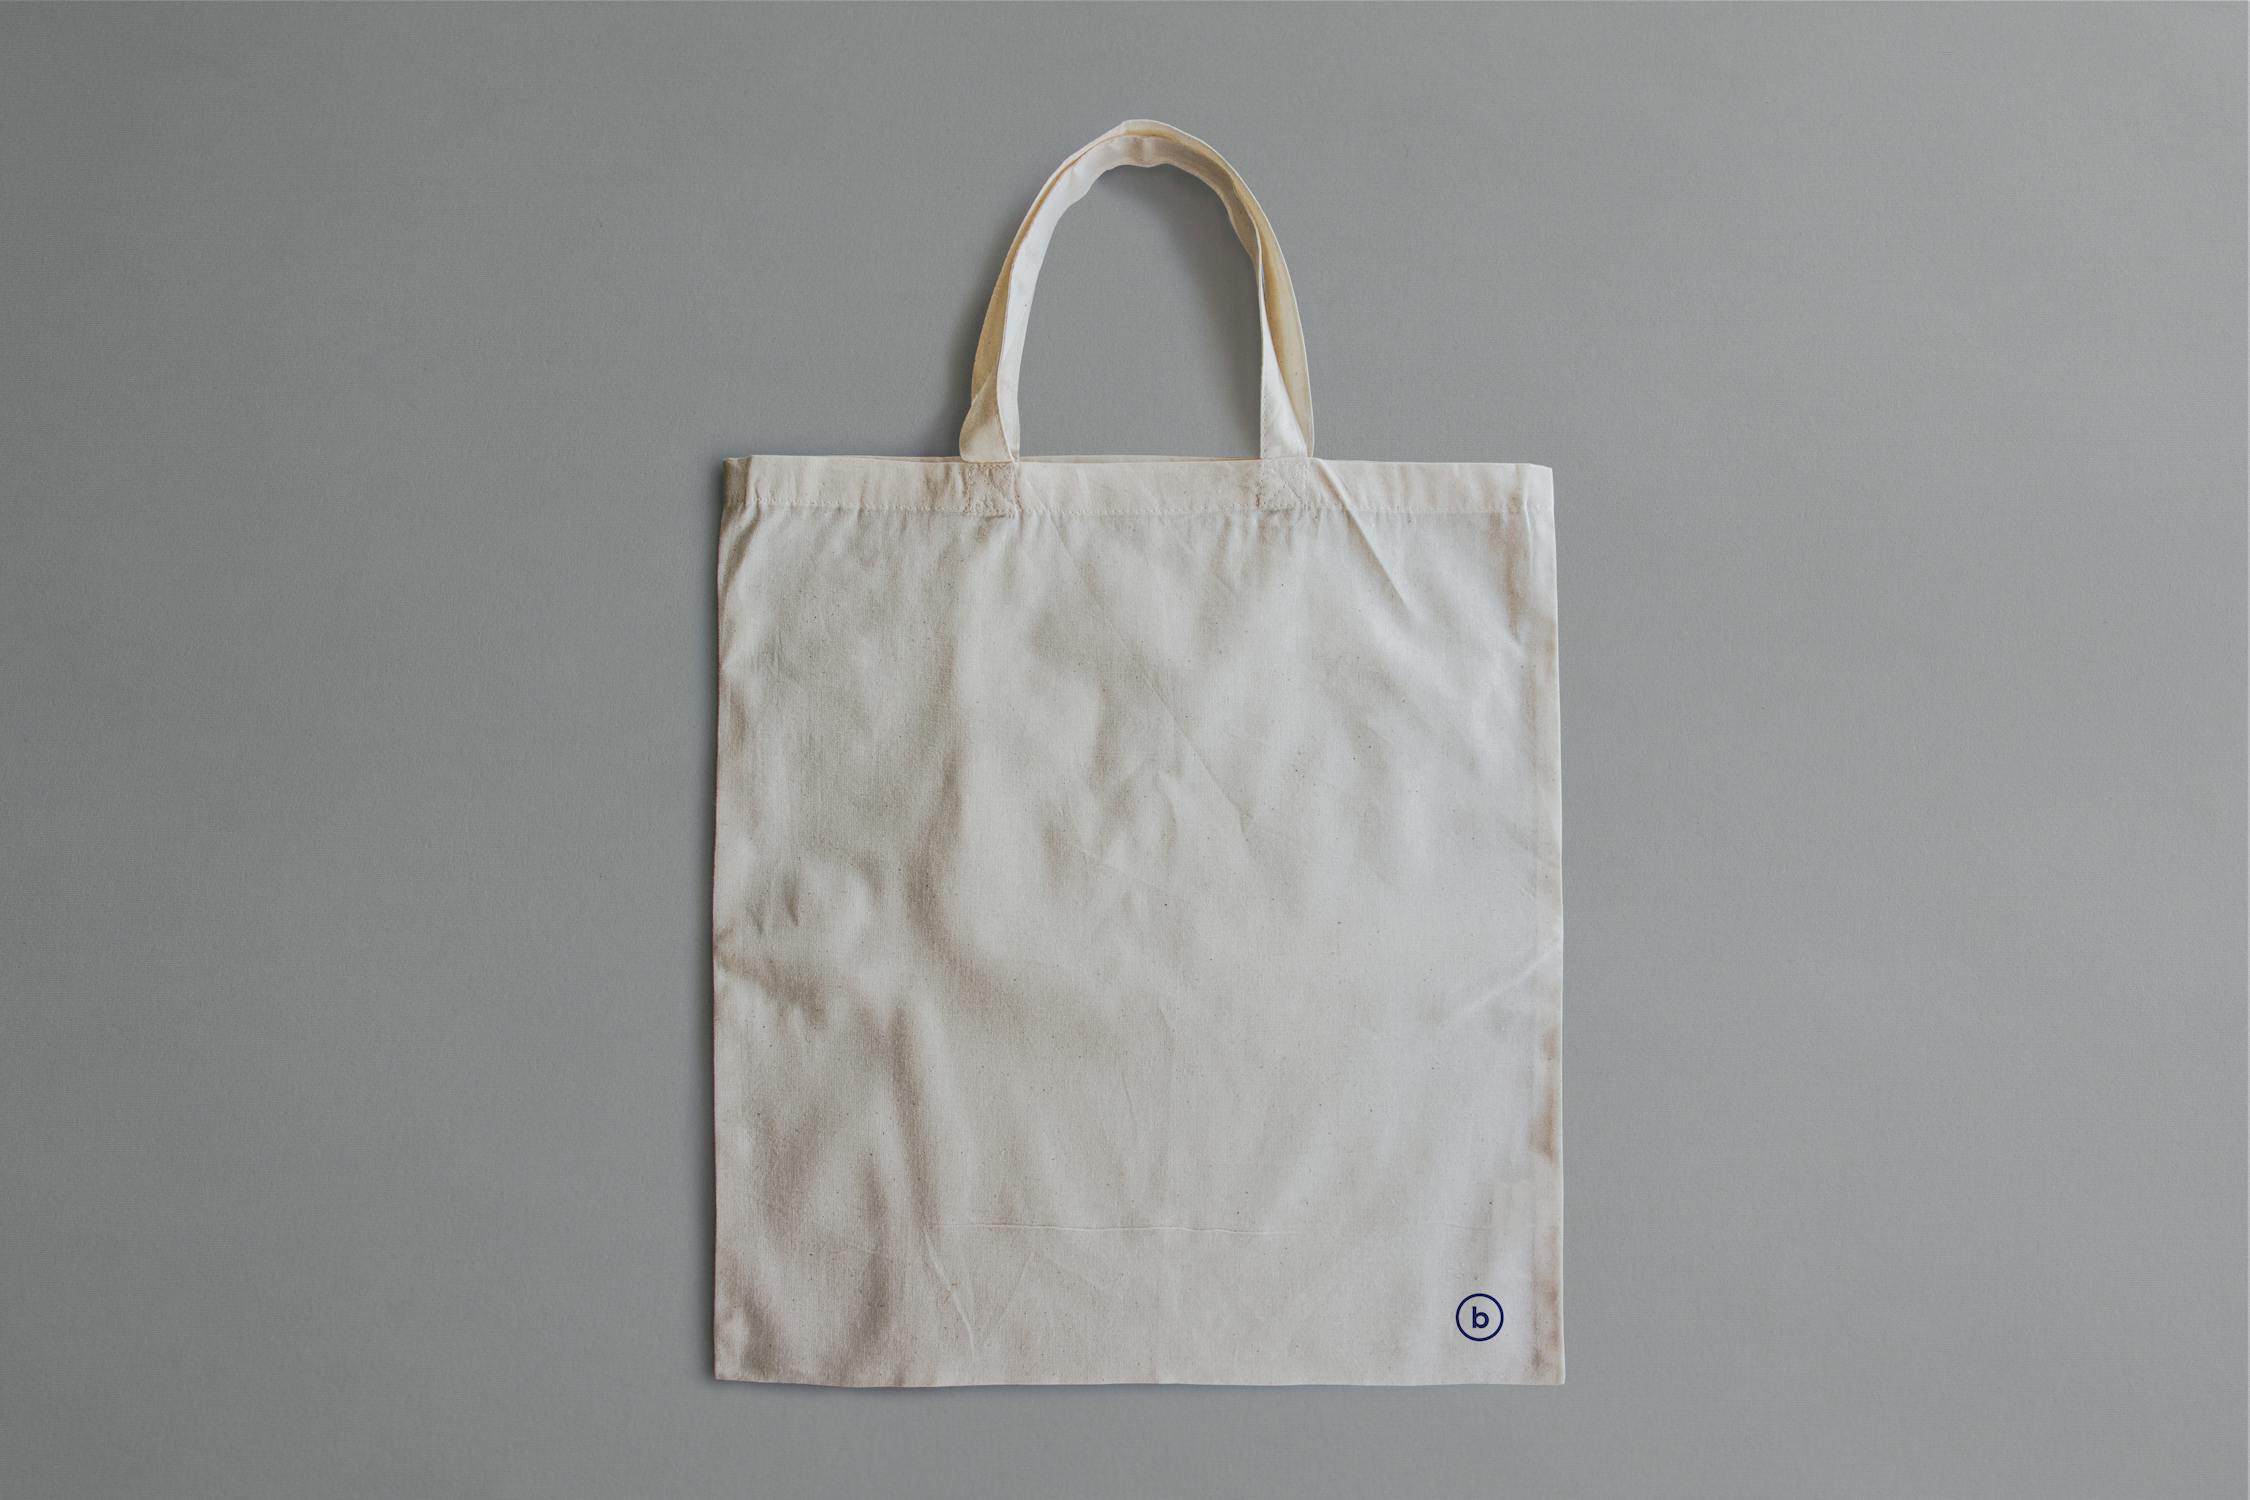 Why is Investing in a Tote Bag a Smart Choice?